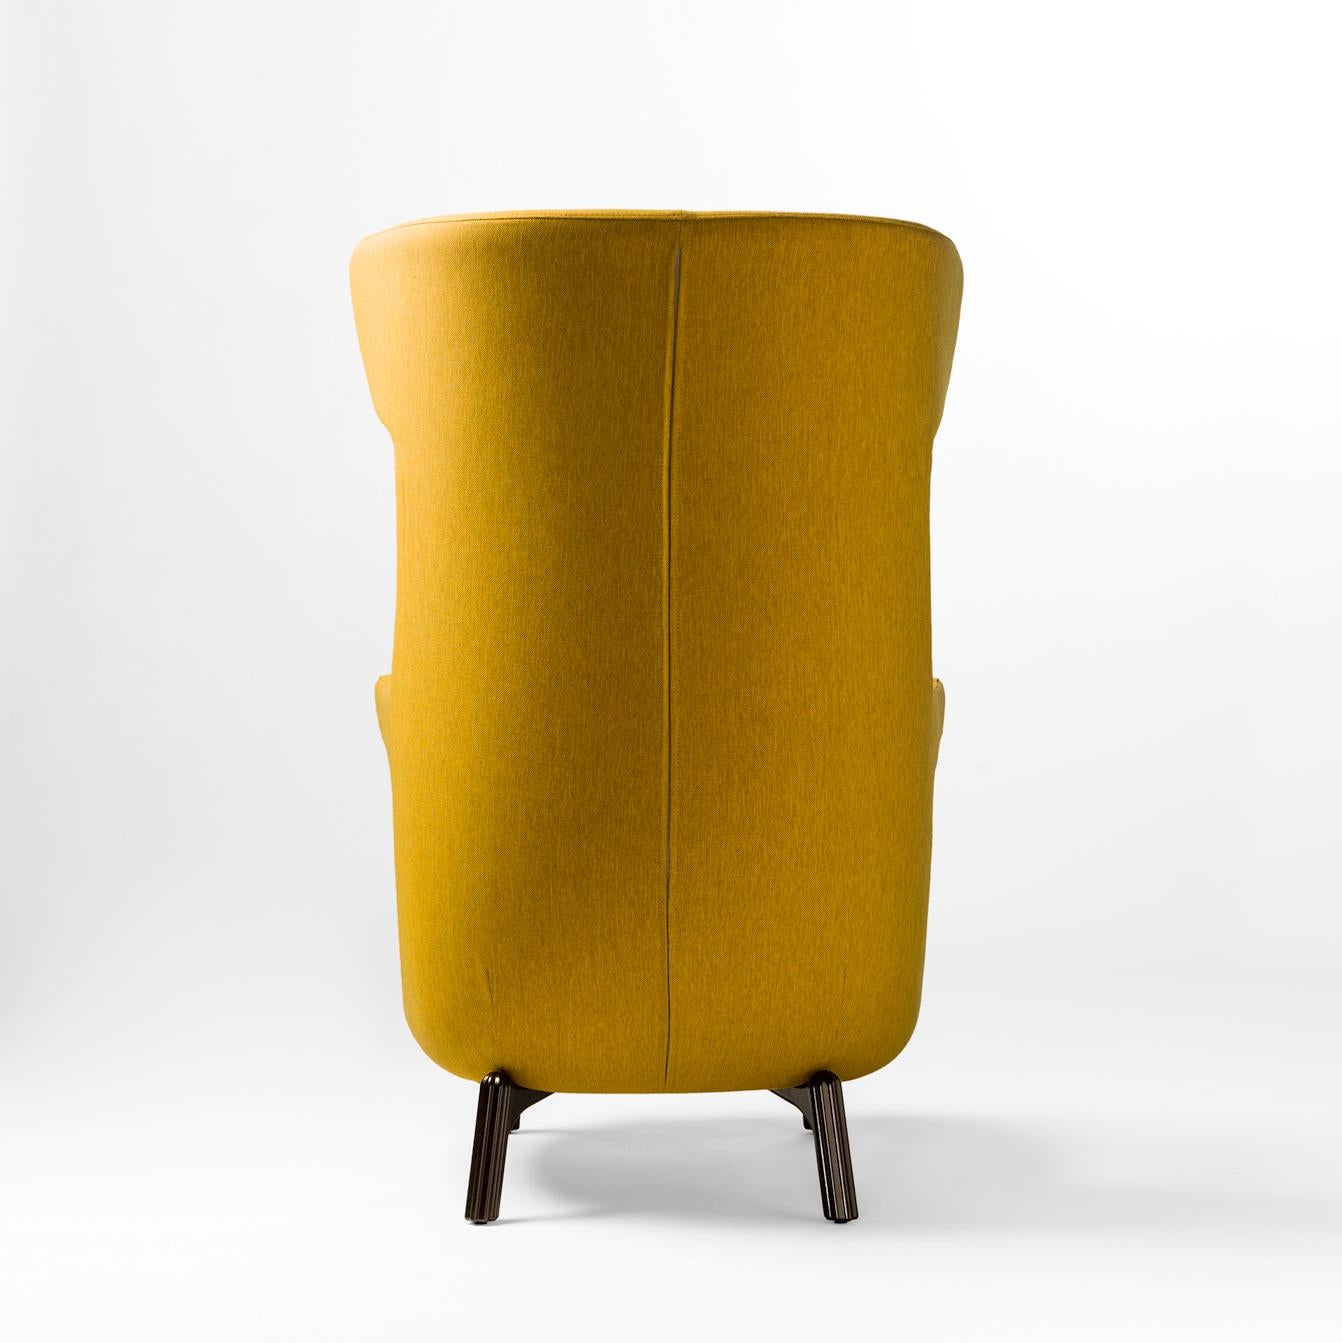 Spanish Jaime Hayon, Contemporary, Monocolor in Yellow Fabric Upholstery Dino Armchair